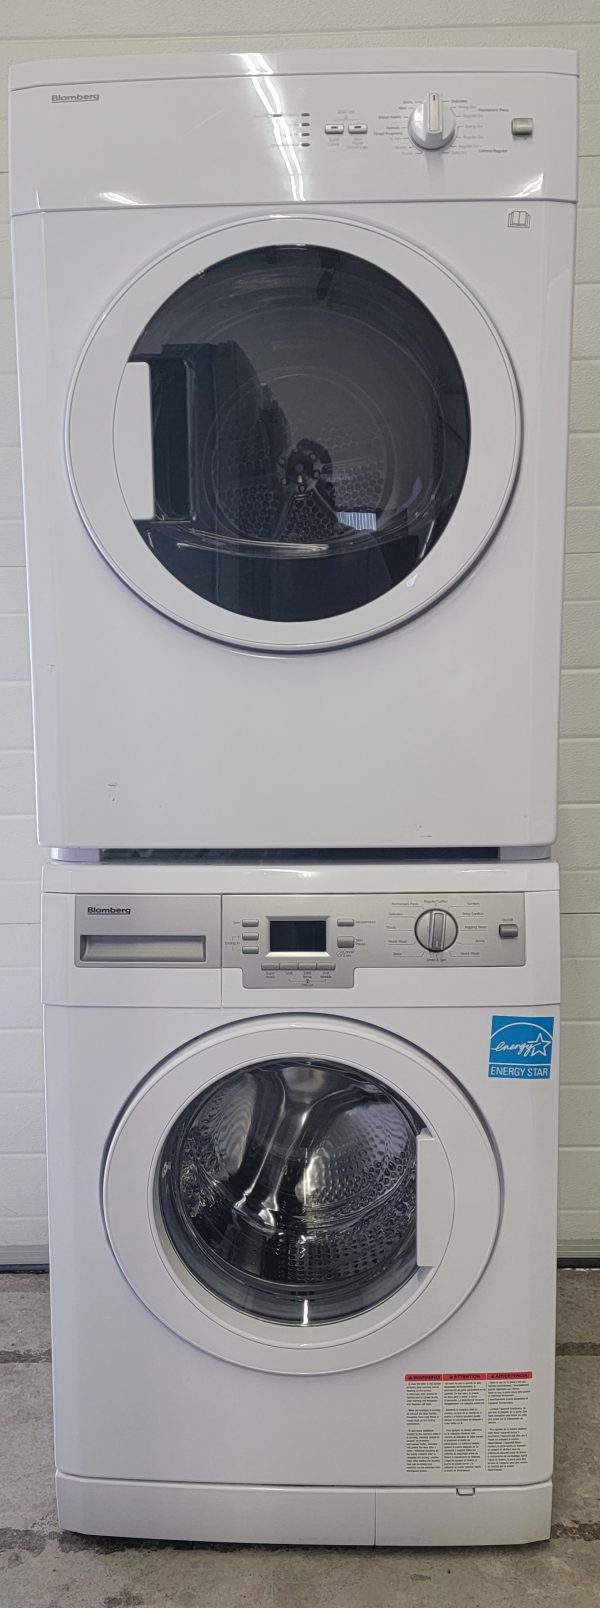 Used Set Blomberg Appartment Size Washing Machine Wm7712nbl01 And Dryer Dv17542